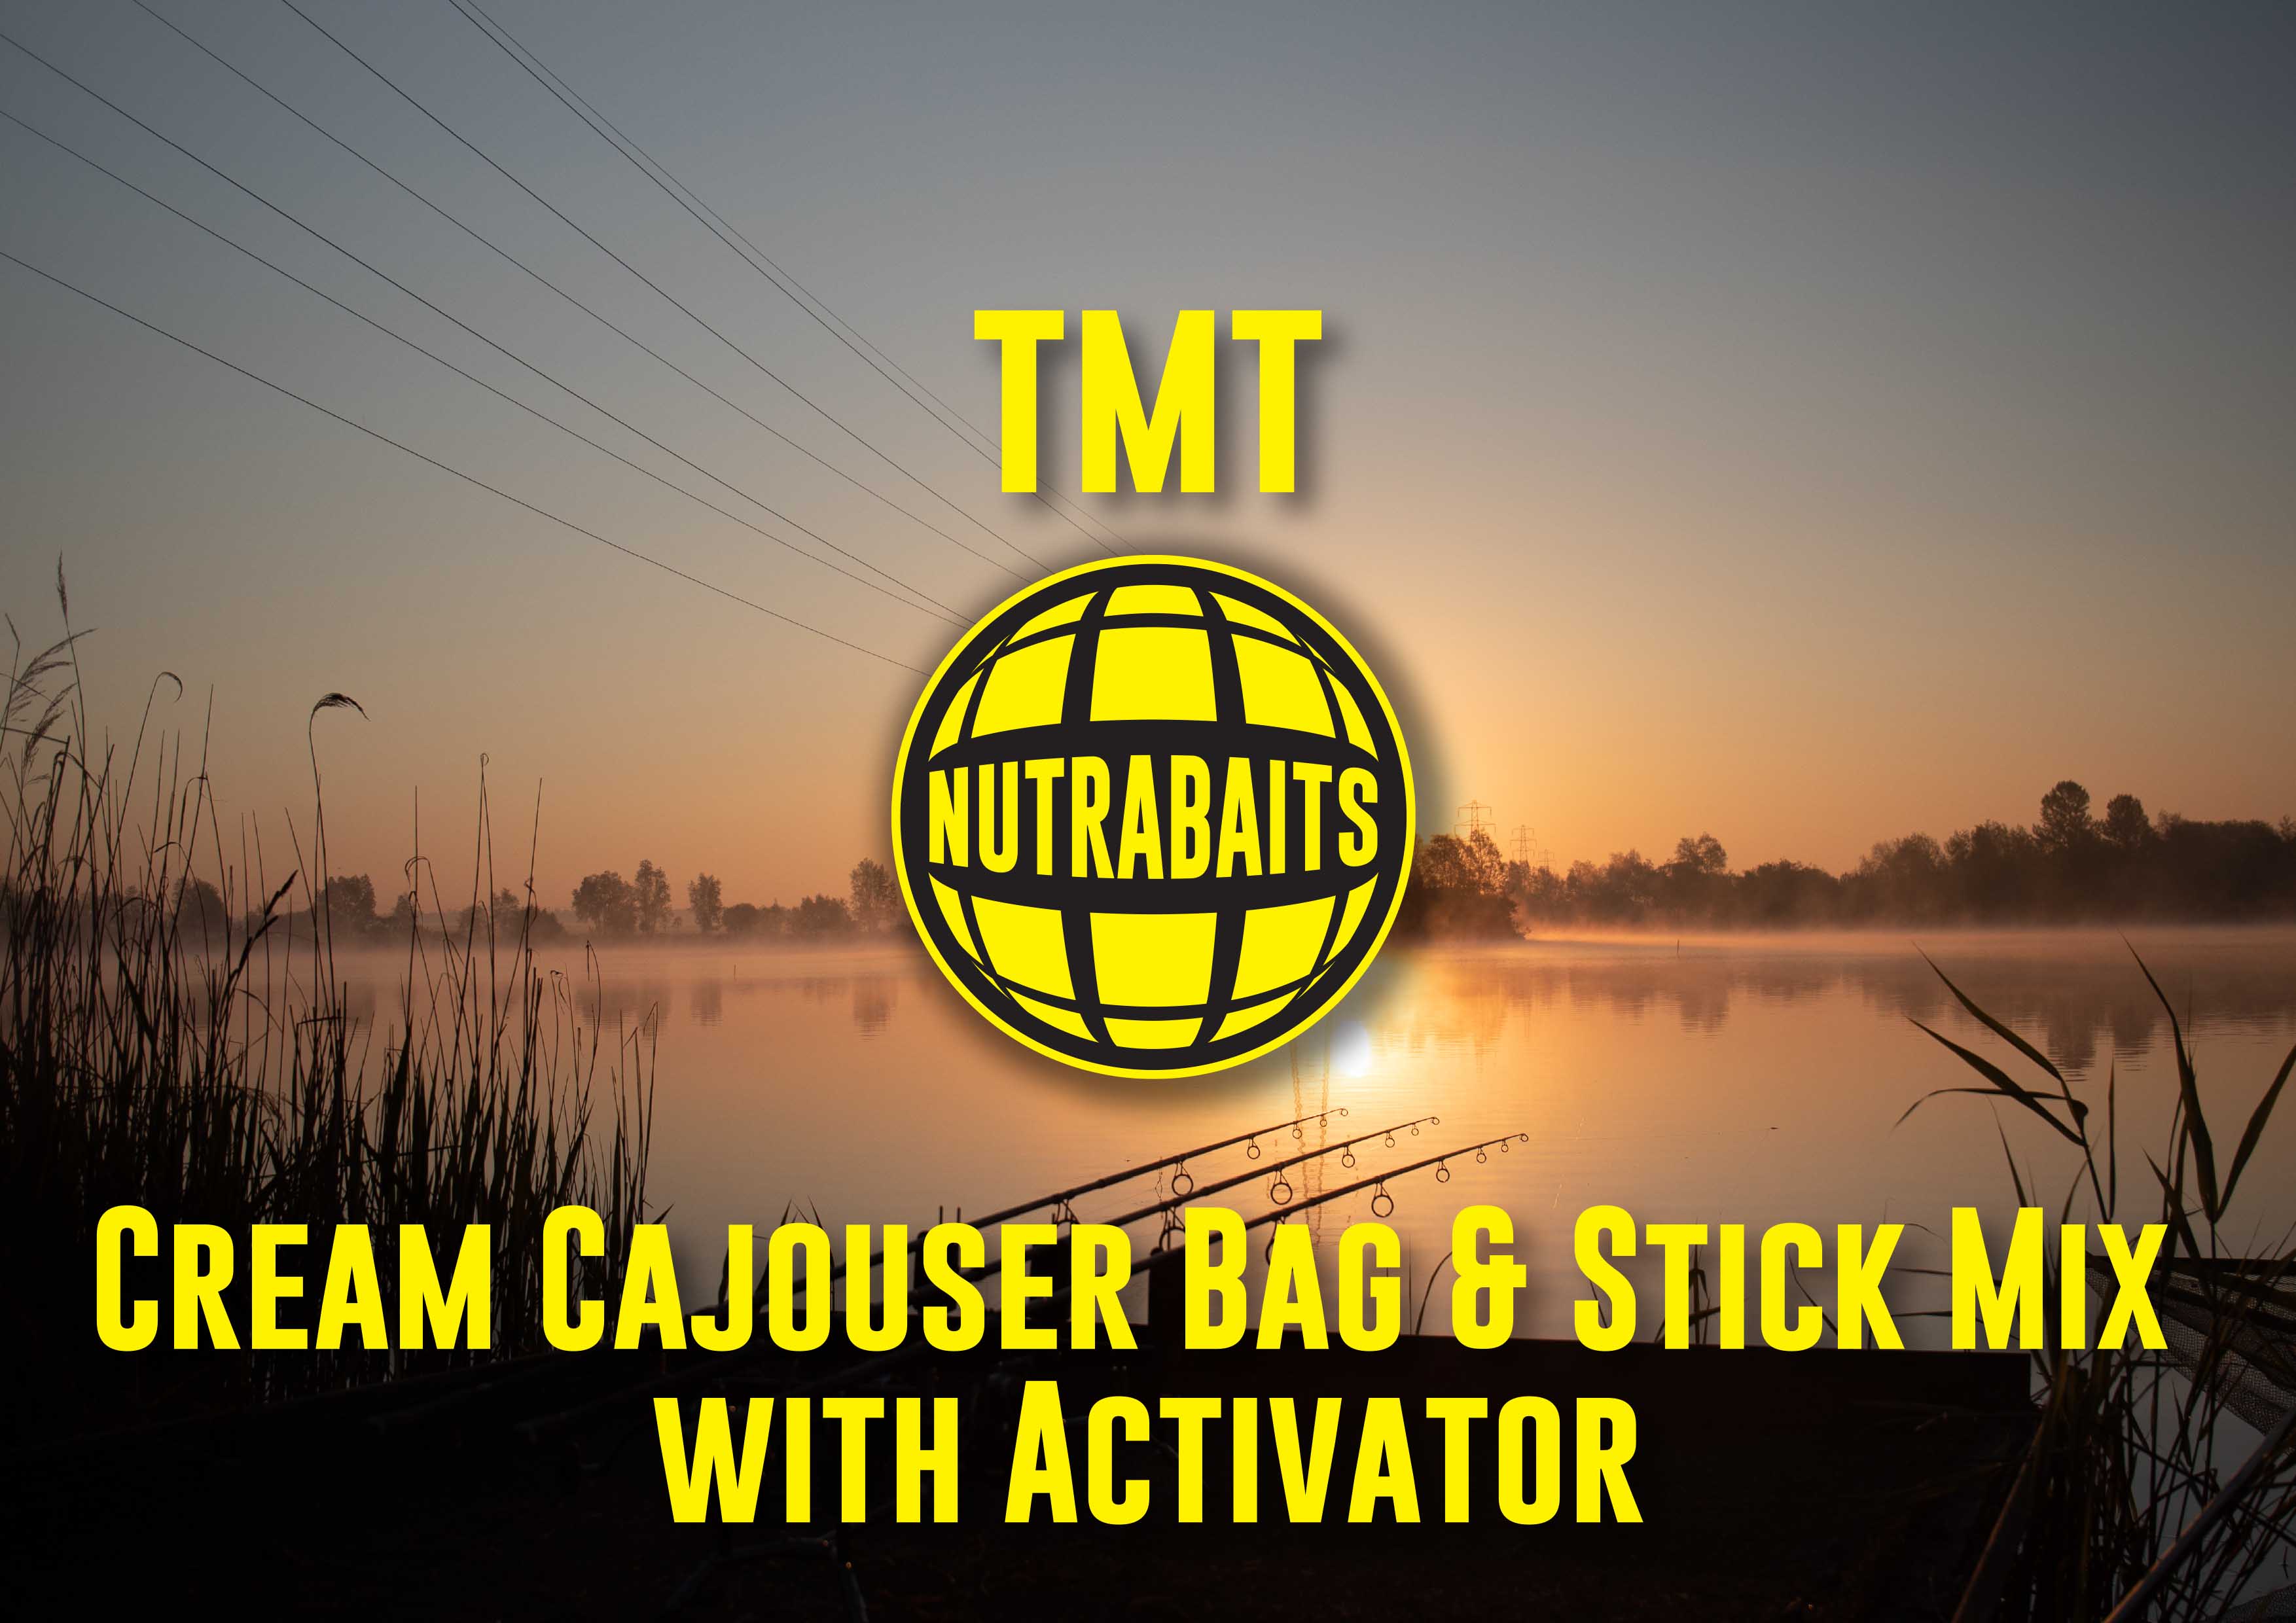 Two Minute Tuesday - Cream Cajouser Bag & Stick Mix with Activator